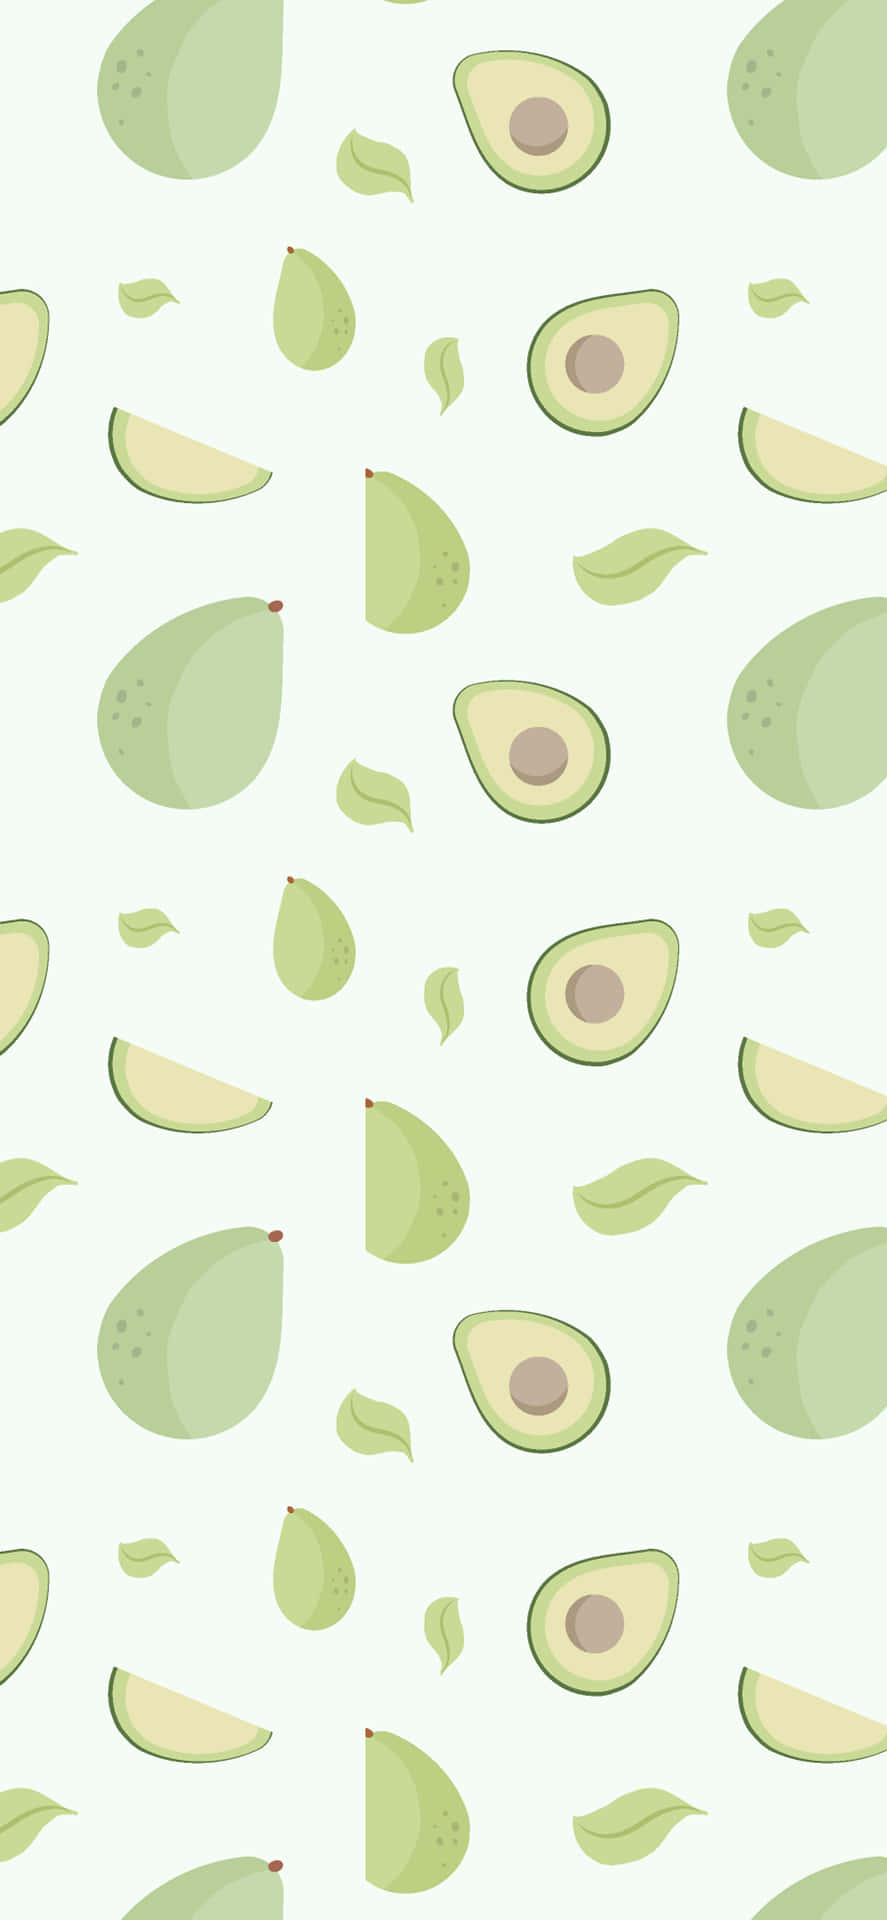 Take the 'Guac To Go' with an Avocado Iphone Wallpaper